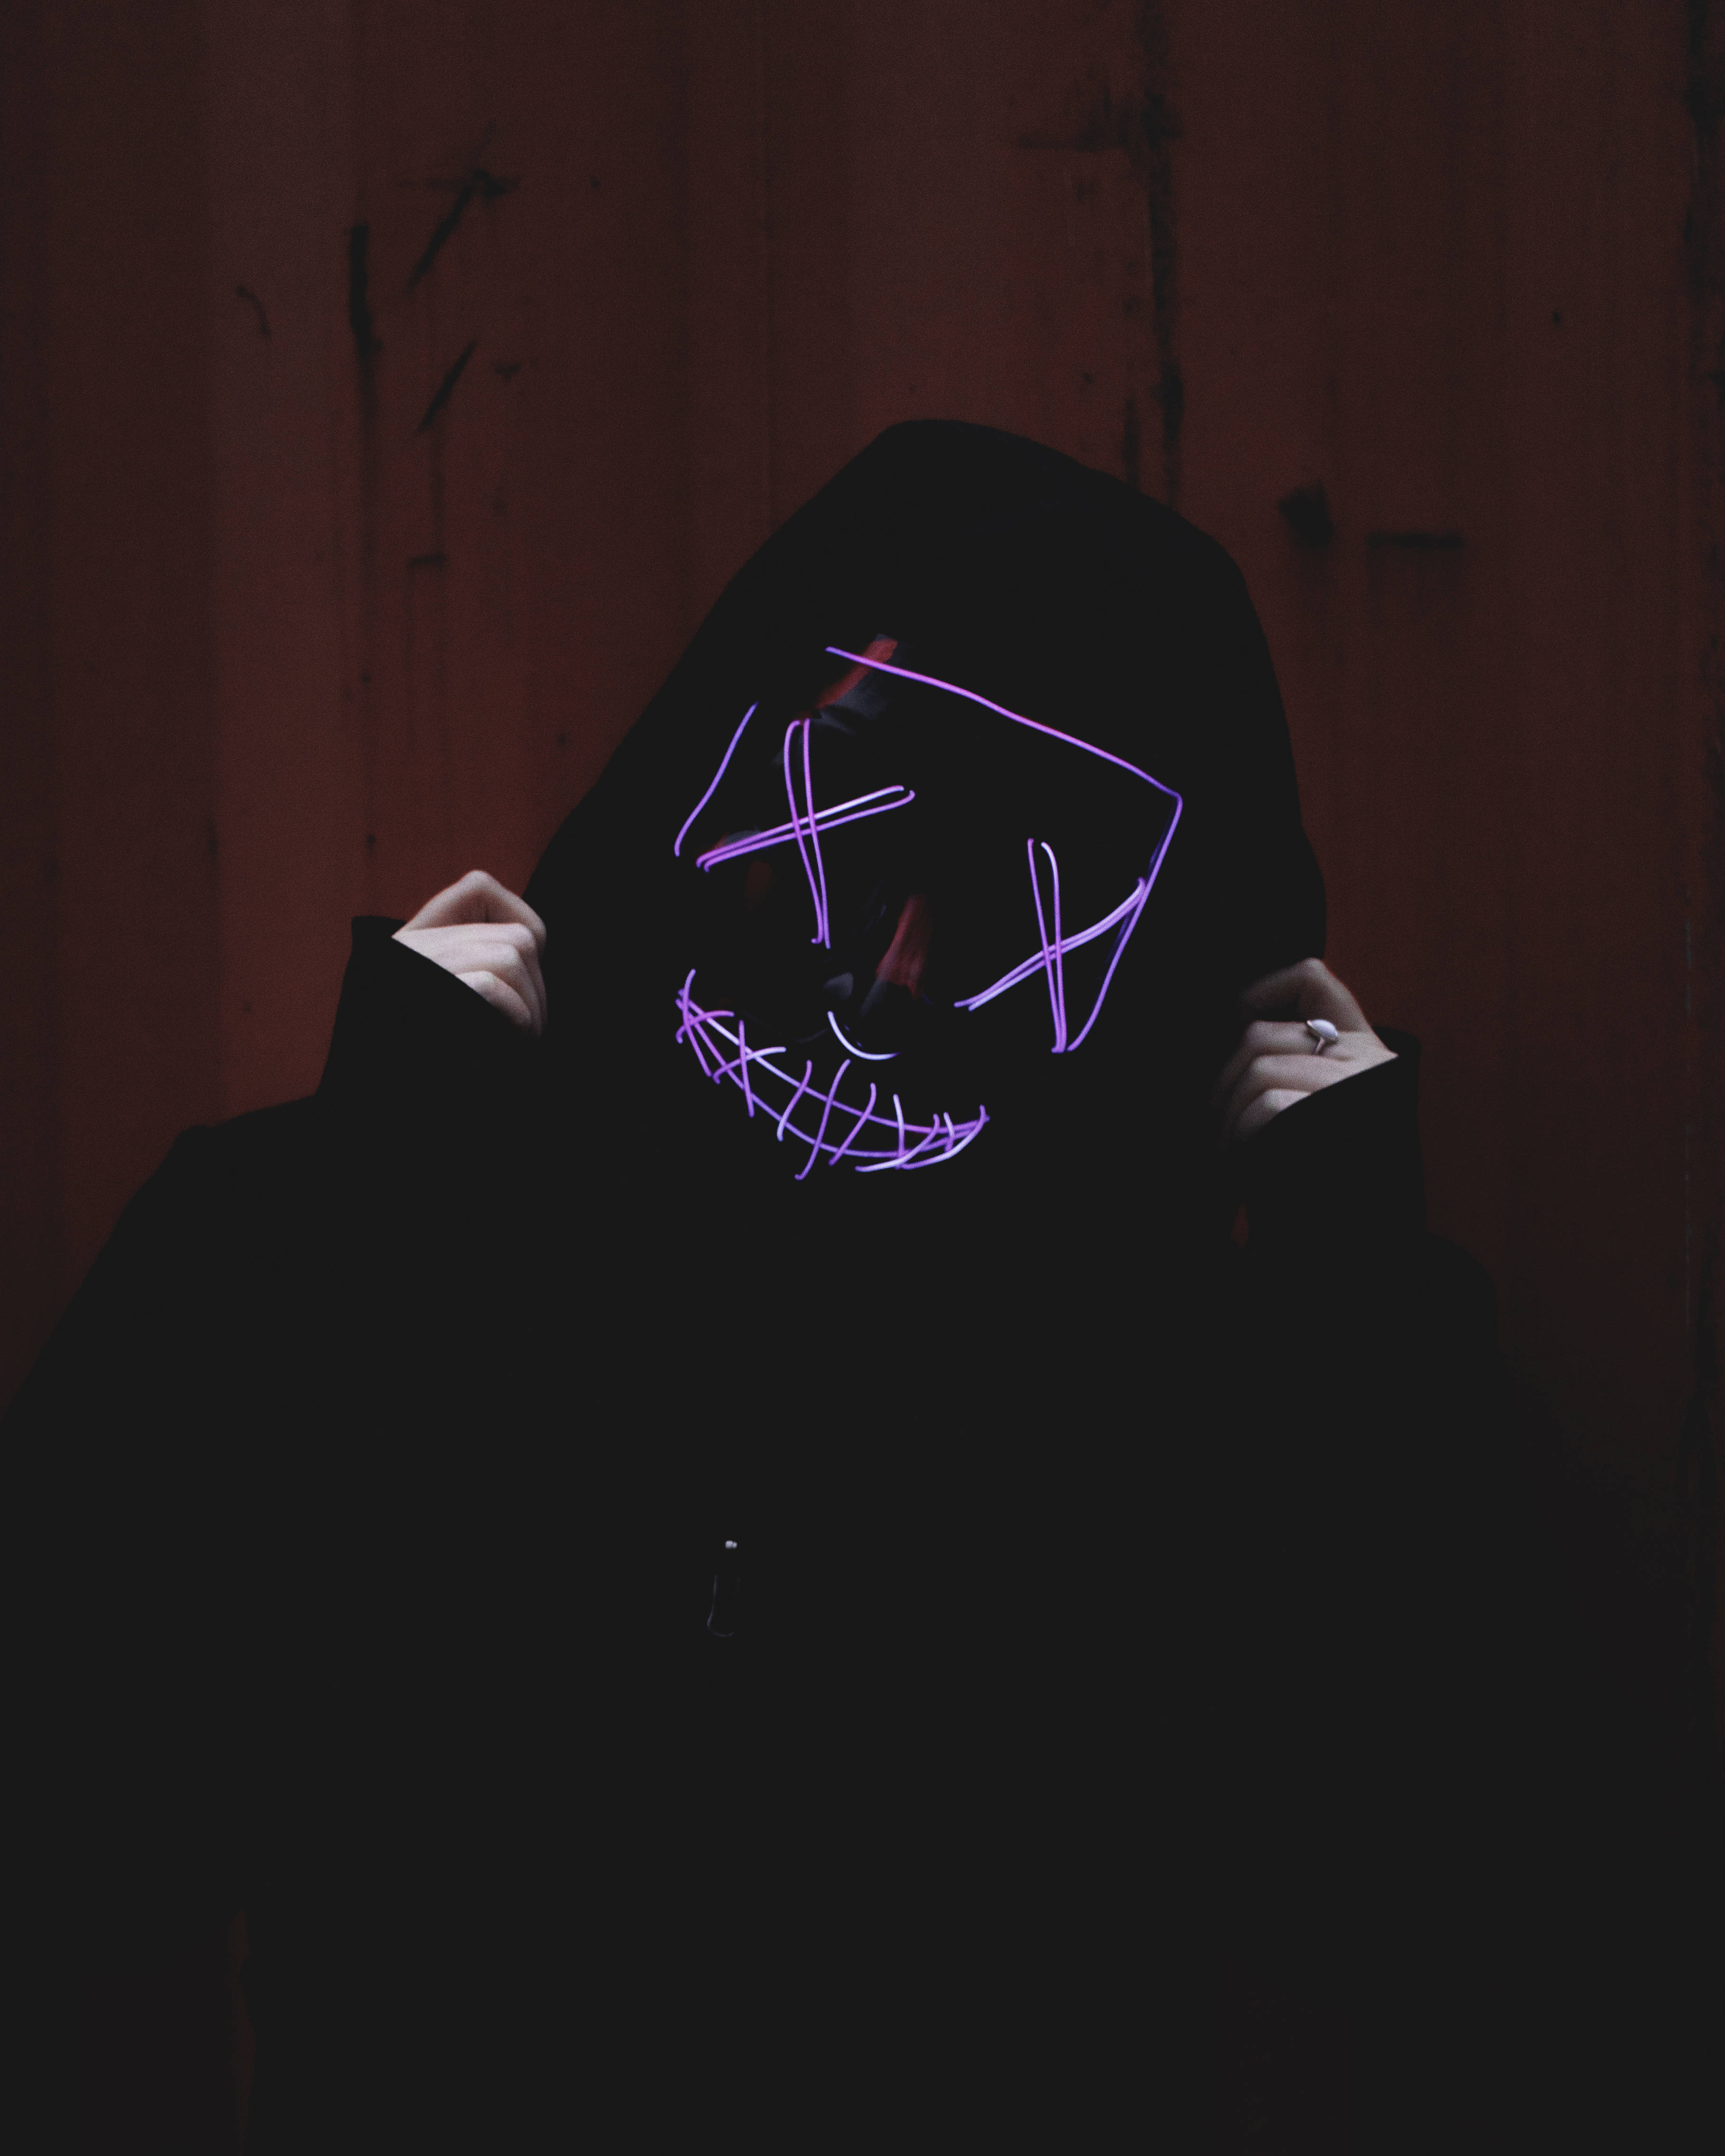 Download The Purge Mask Purple Fan-inspired Wallpaper | Wallpapers.com